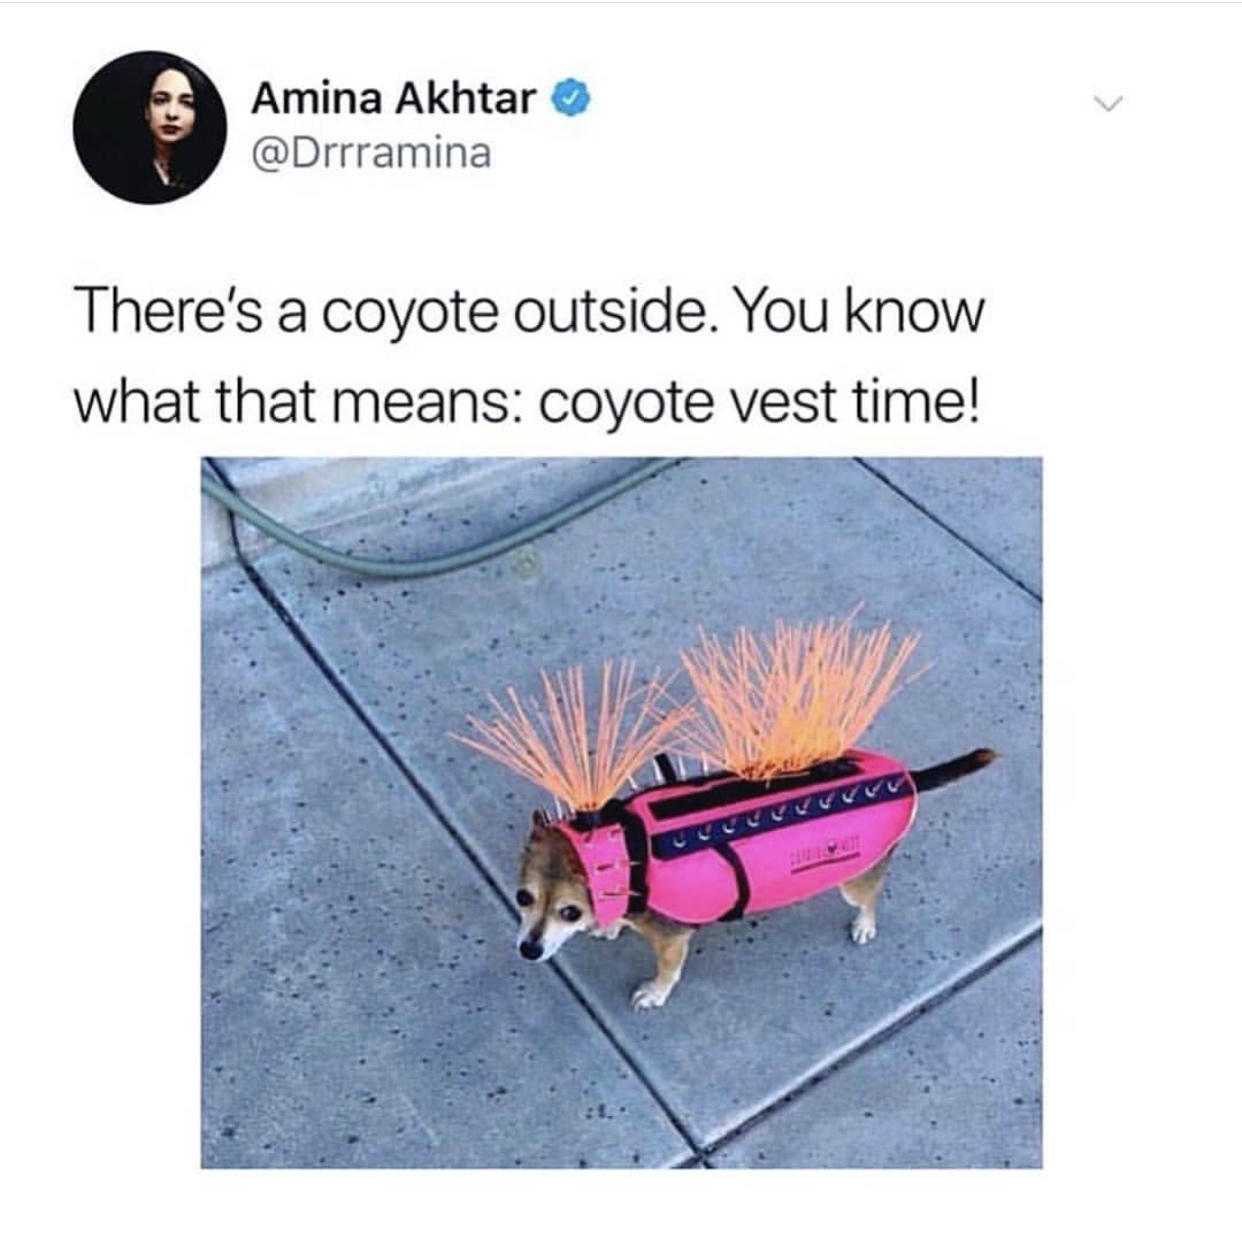 anti coyote vest - Amina Akhtar There's a coyote outside. You know what that means coyote vest time!